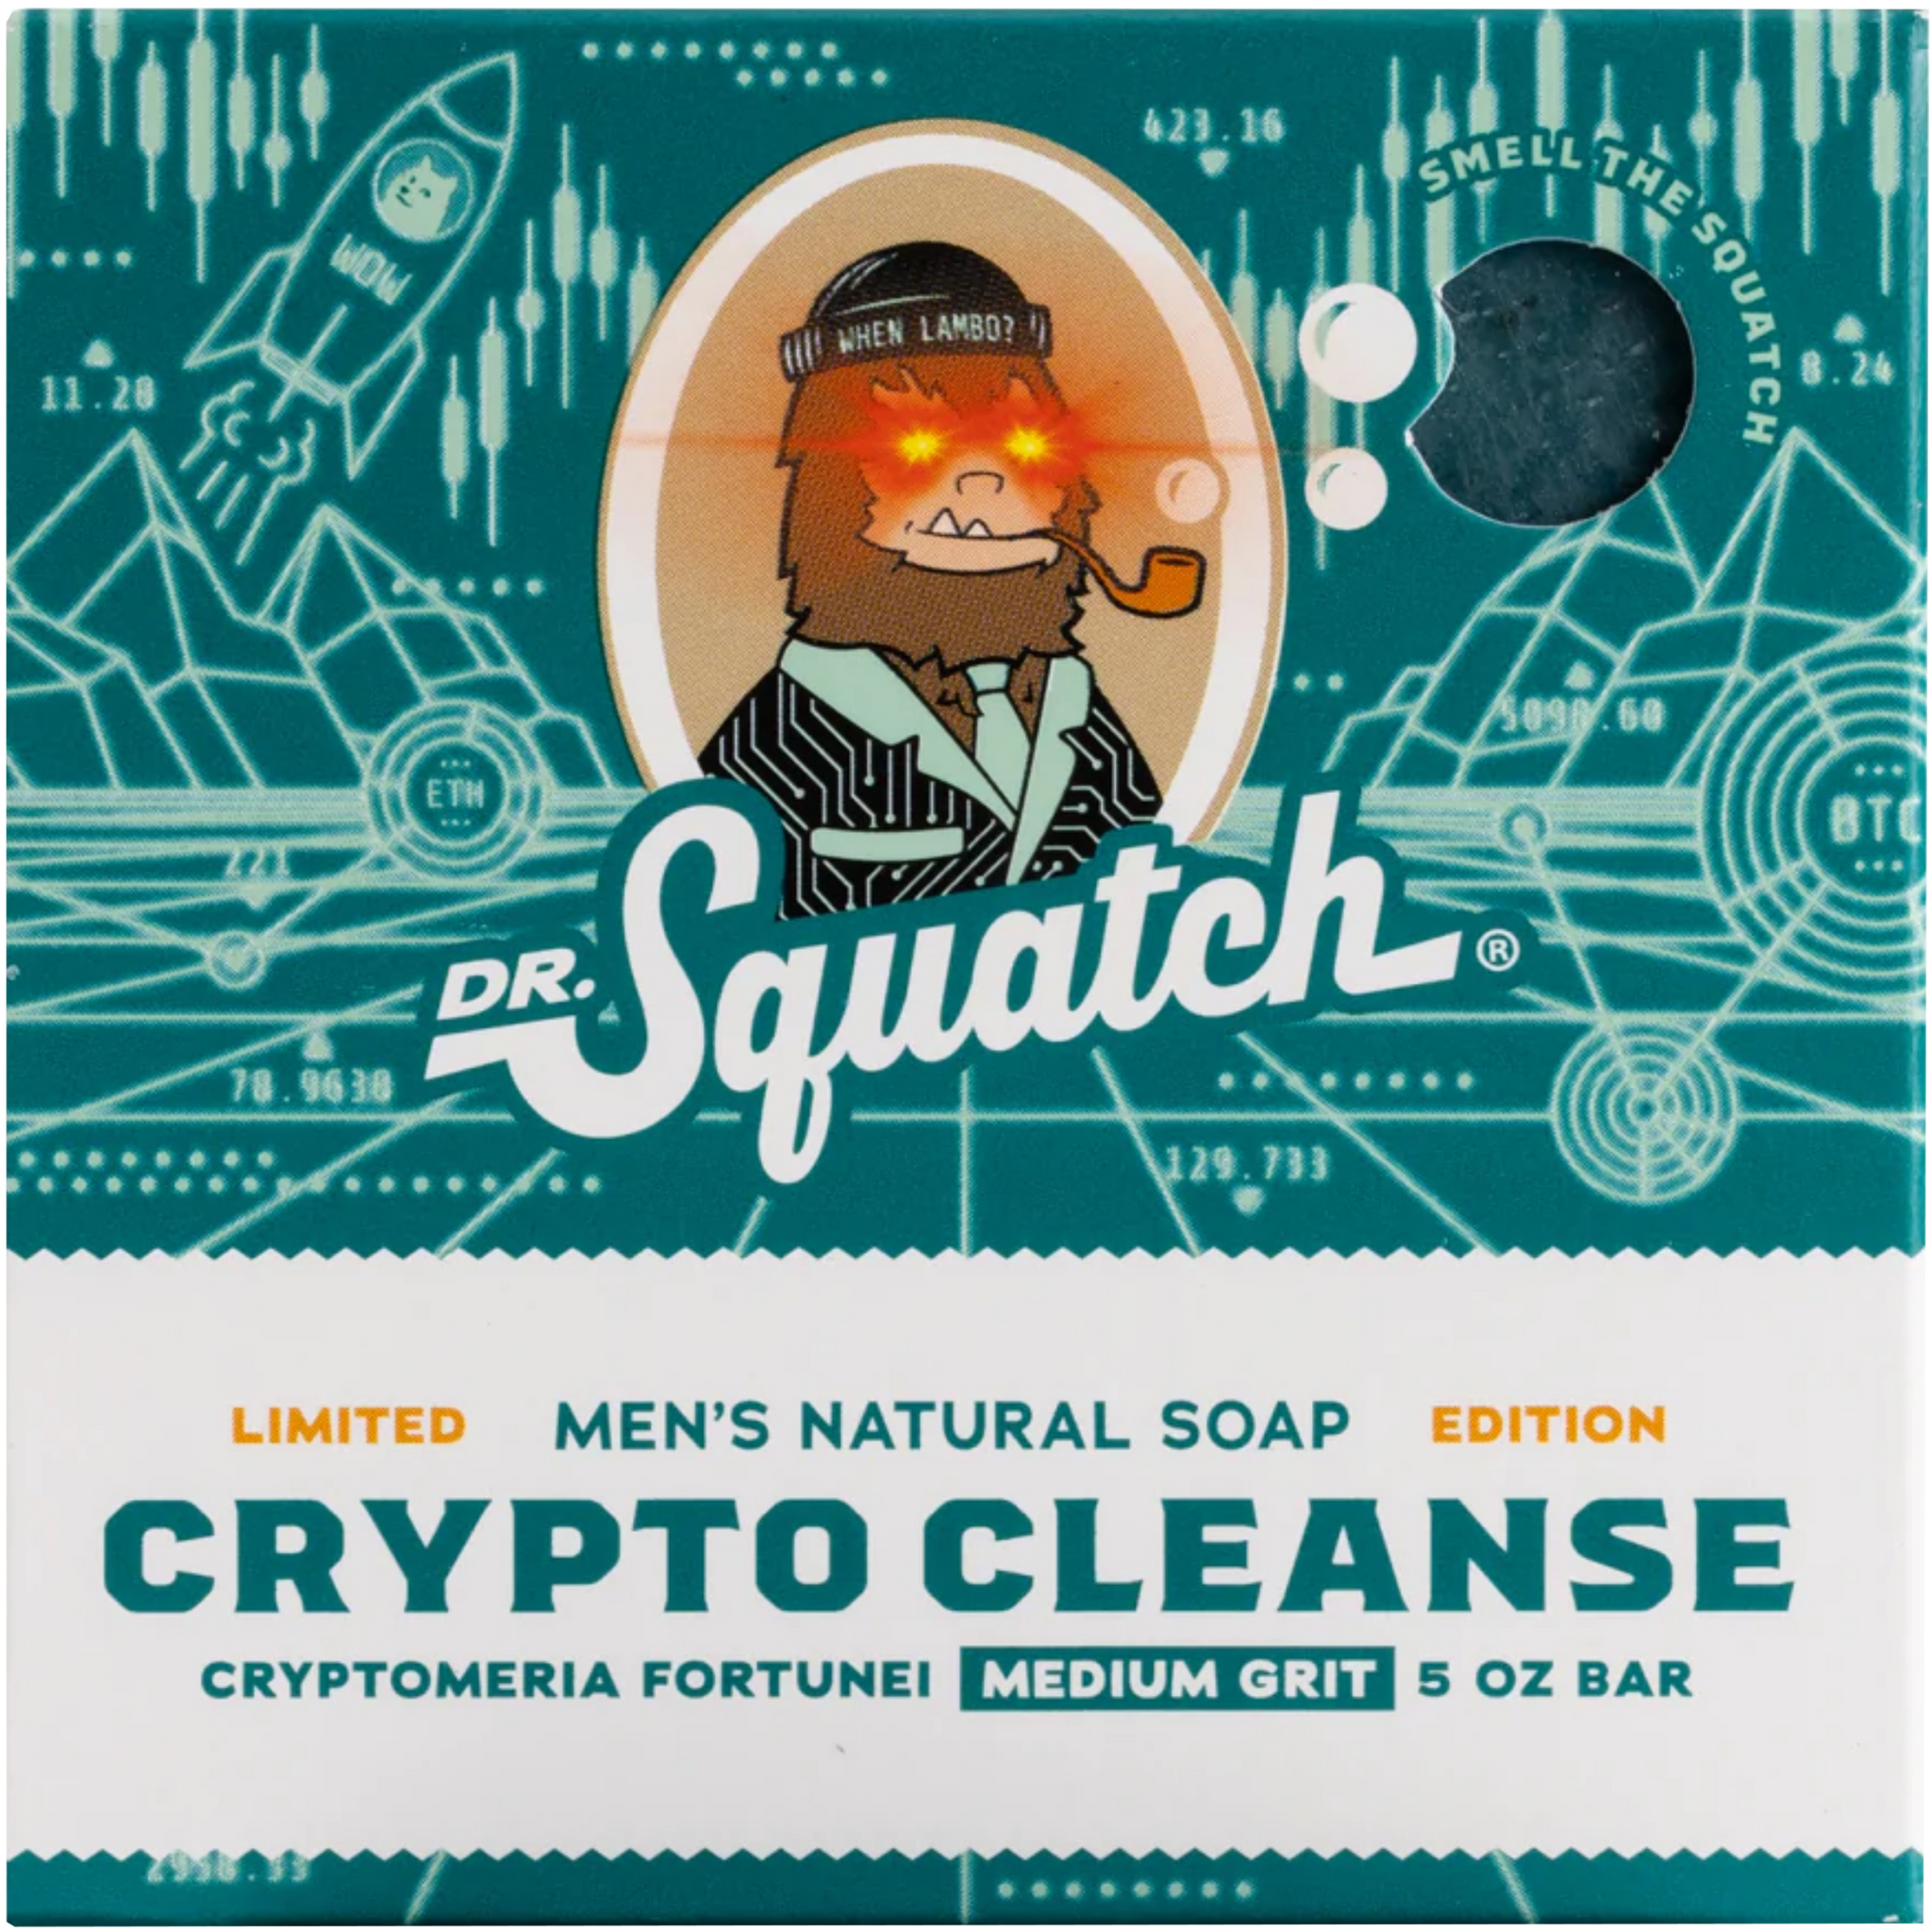 Dr. Squatch NFT Sweepstakes  Sweepstakes, Sweepstakes winner